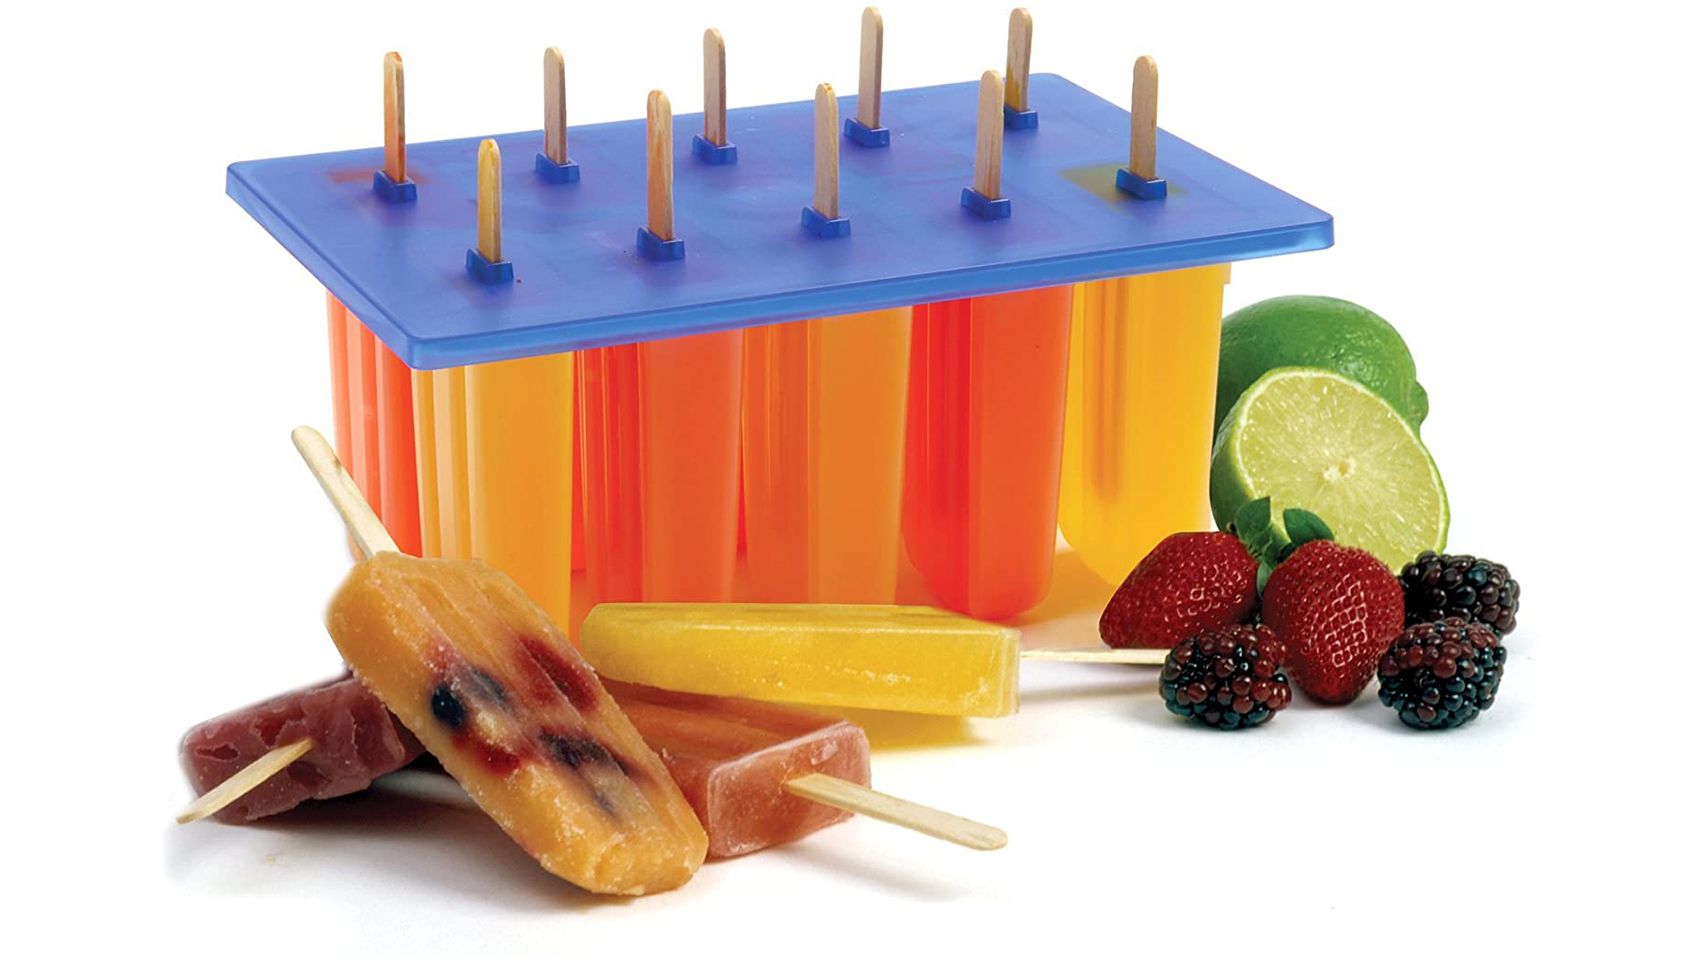 How to make popsicles: Ice pop experts weigh in on their favorite molds